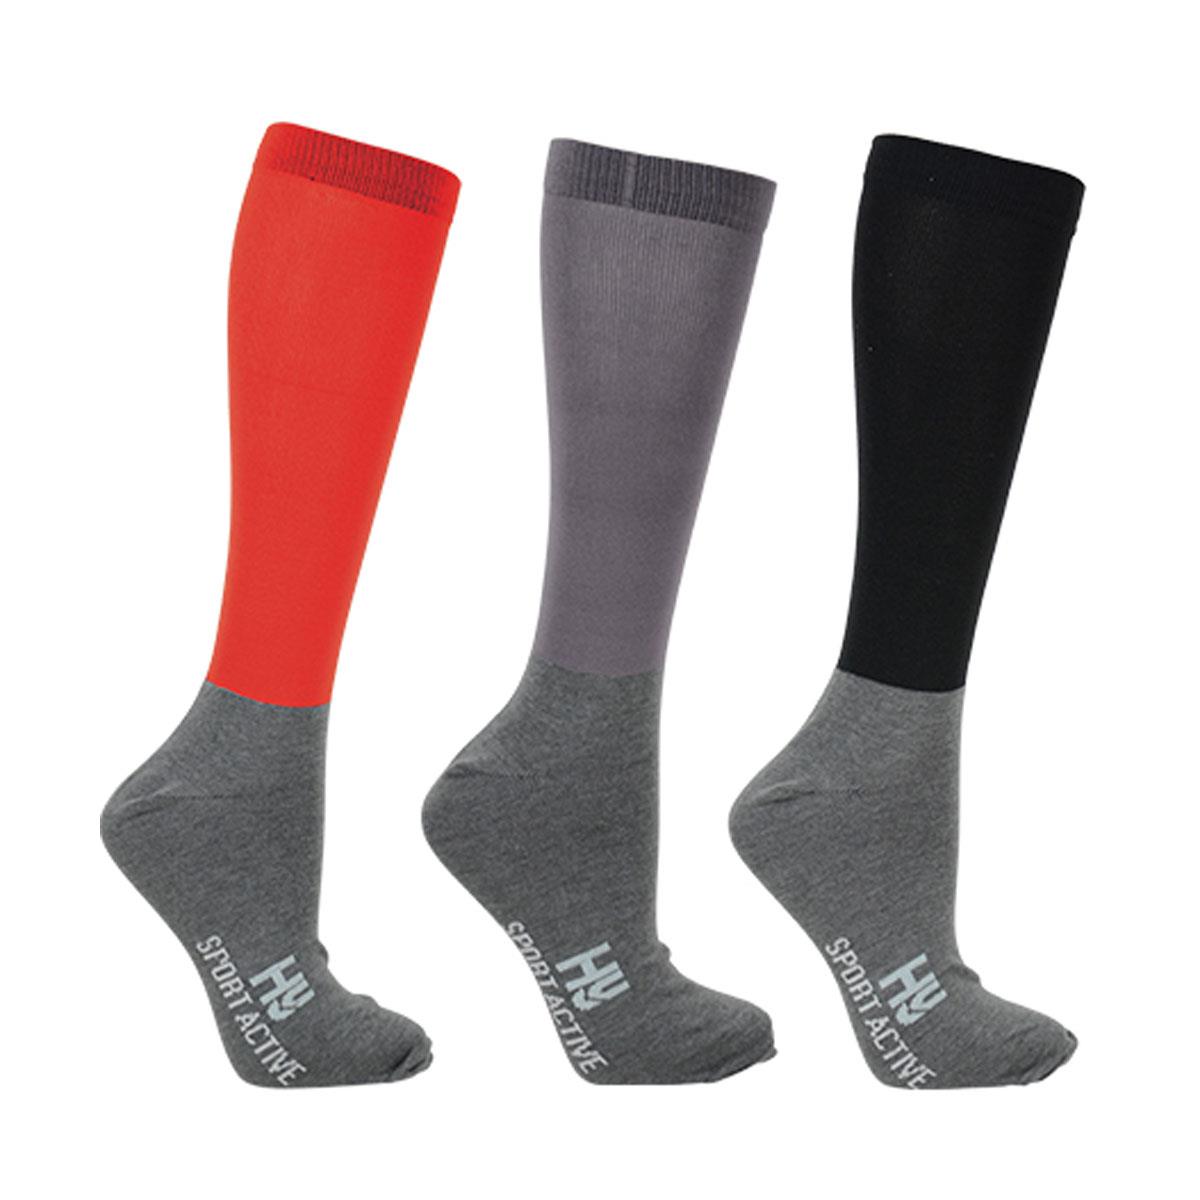 Hy Sport Active Horse Riding Socks (Pack of 3) - Just Horse Riders